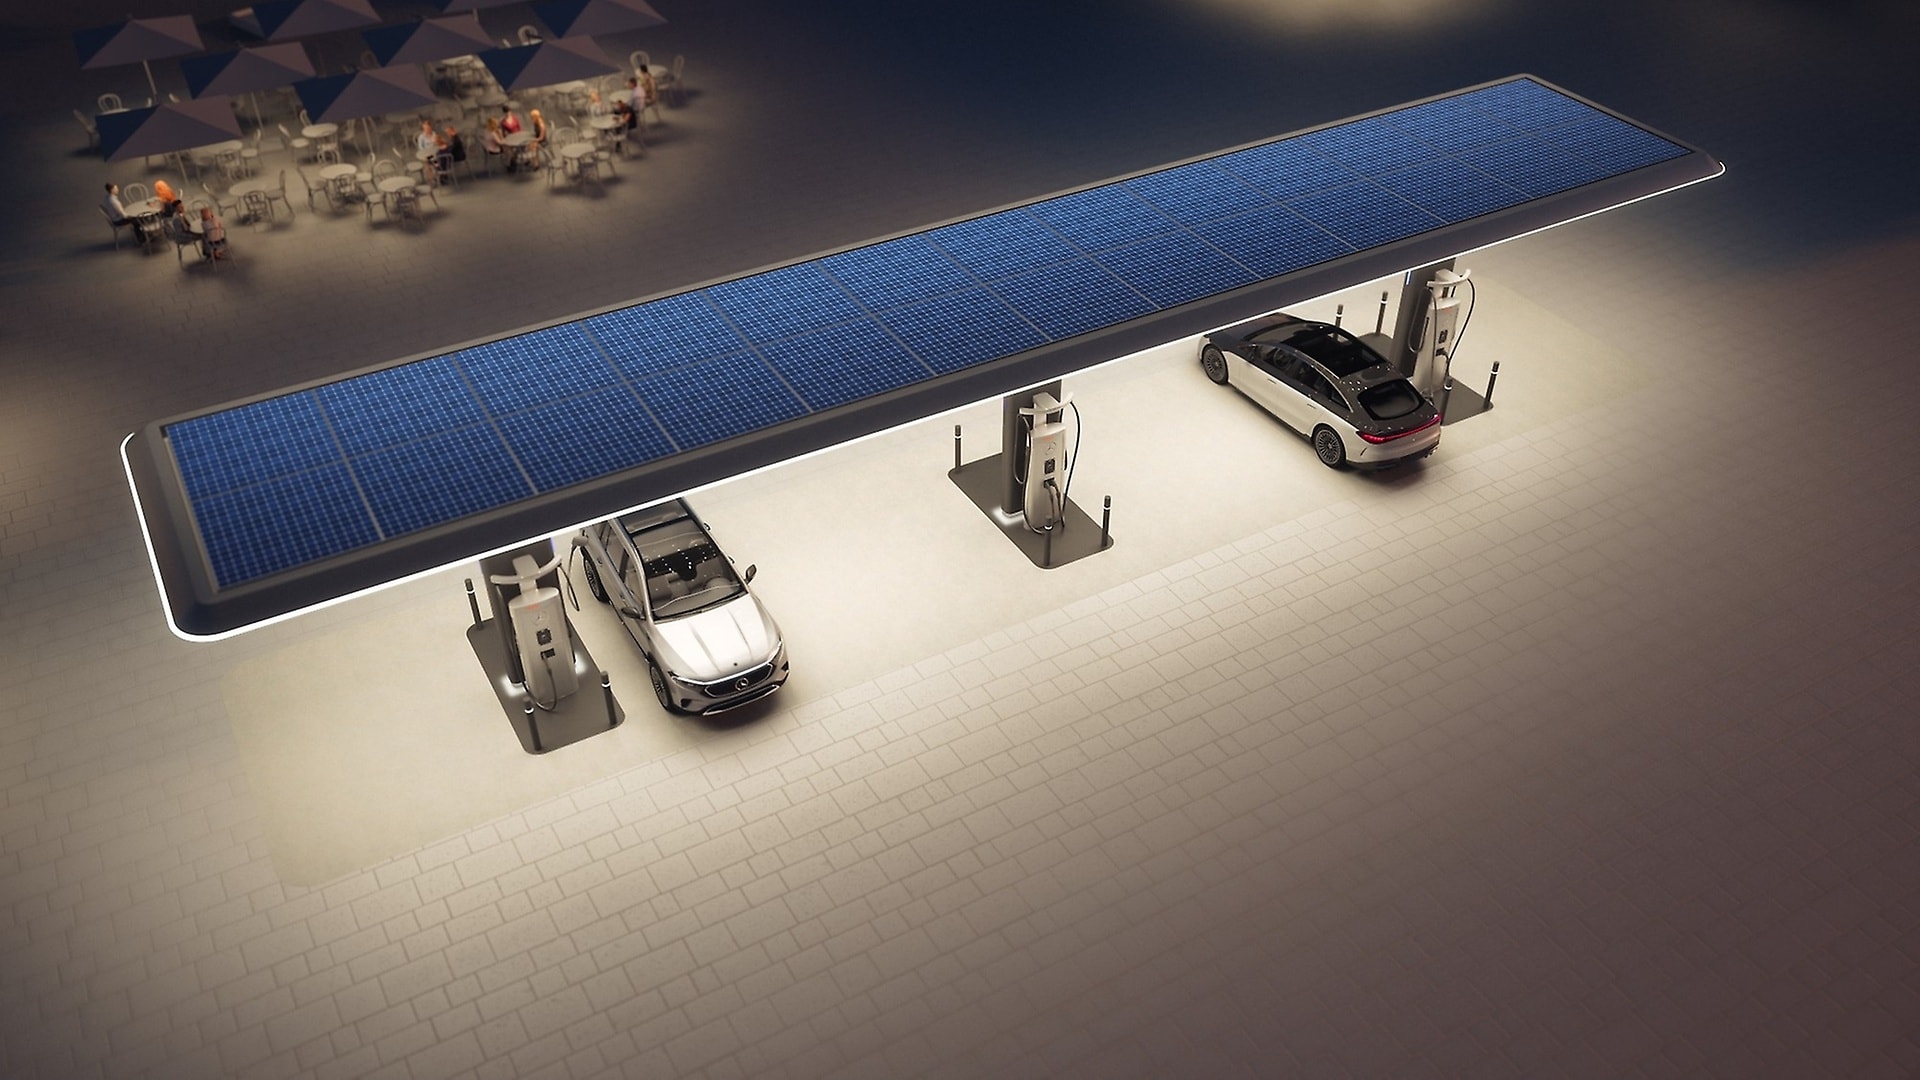 Planned Mercedes-Benz charging station with photovoltaic system.